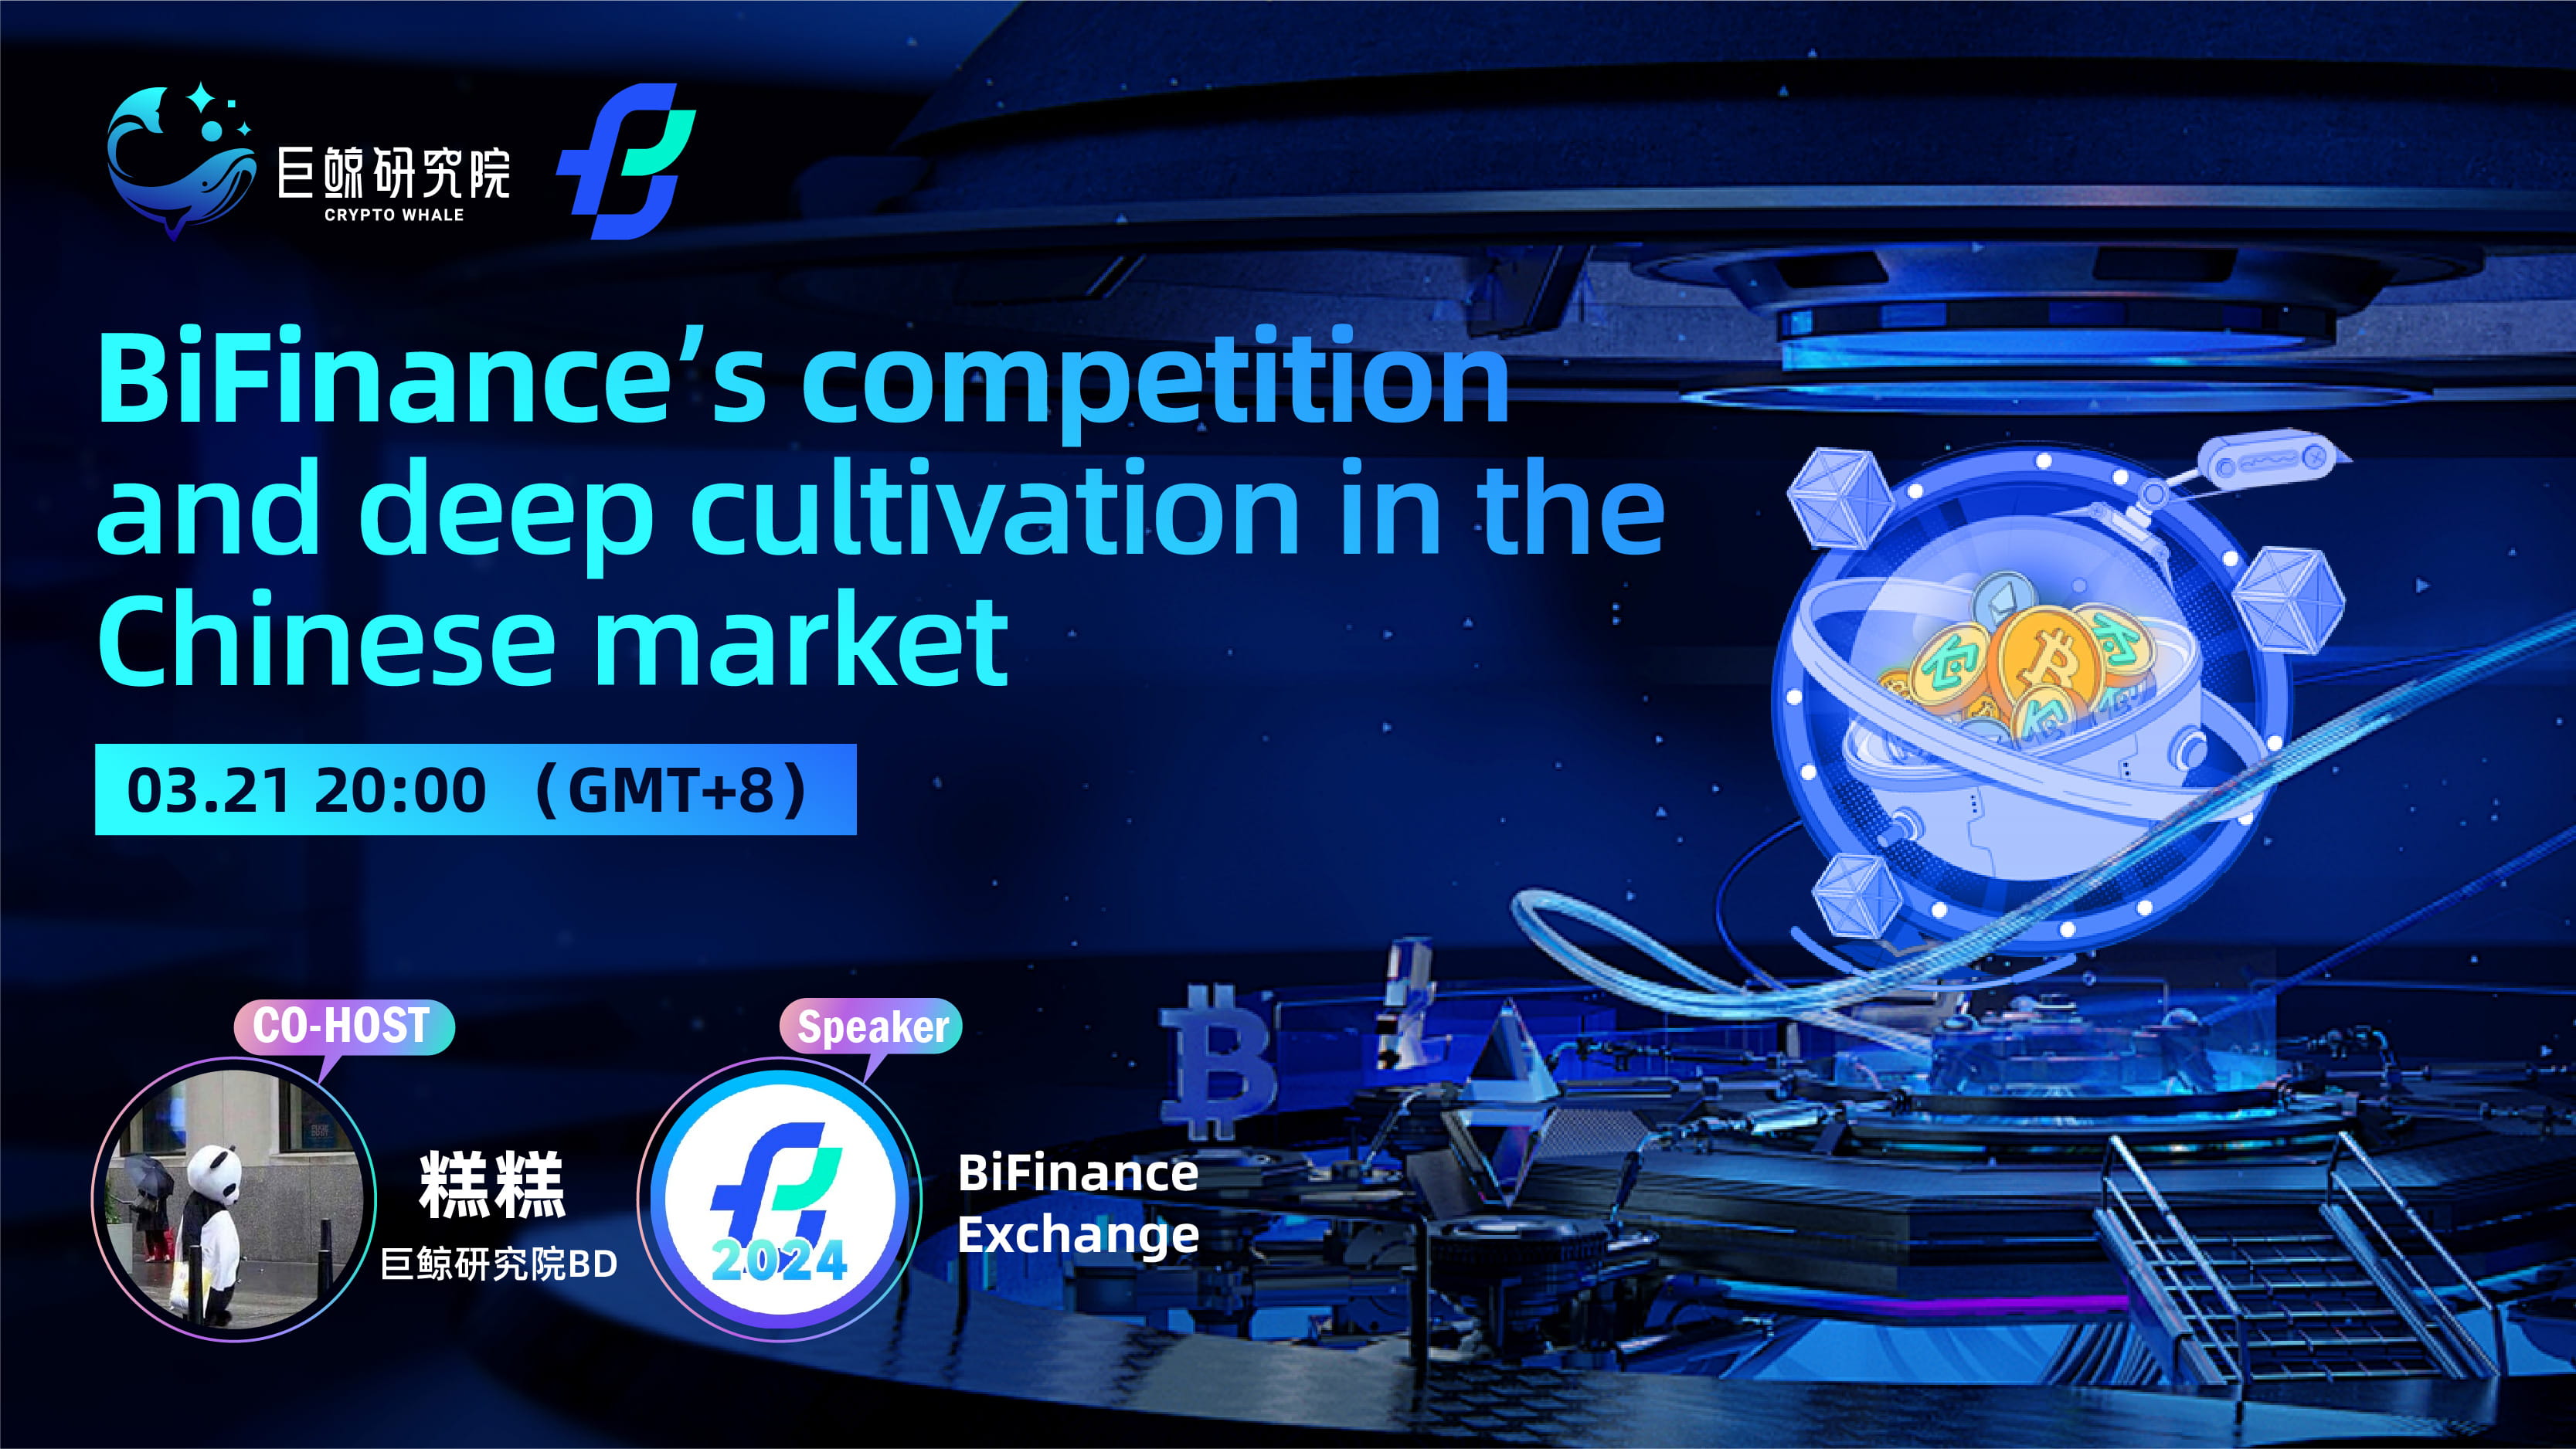 BiFinance's competition and deep cultivation in the Chinese market